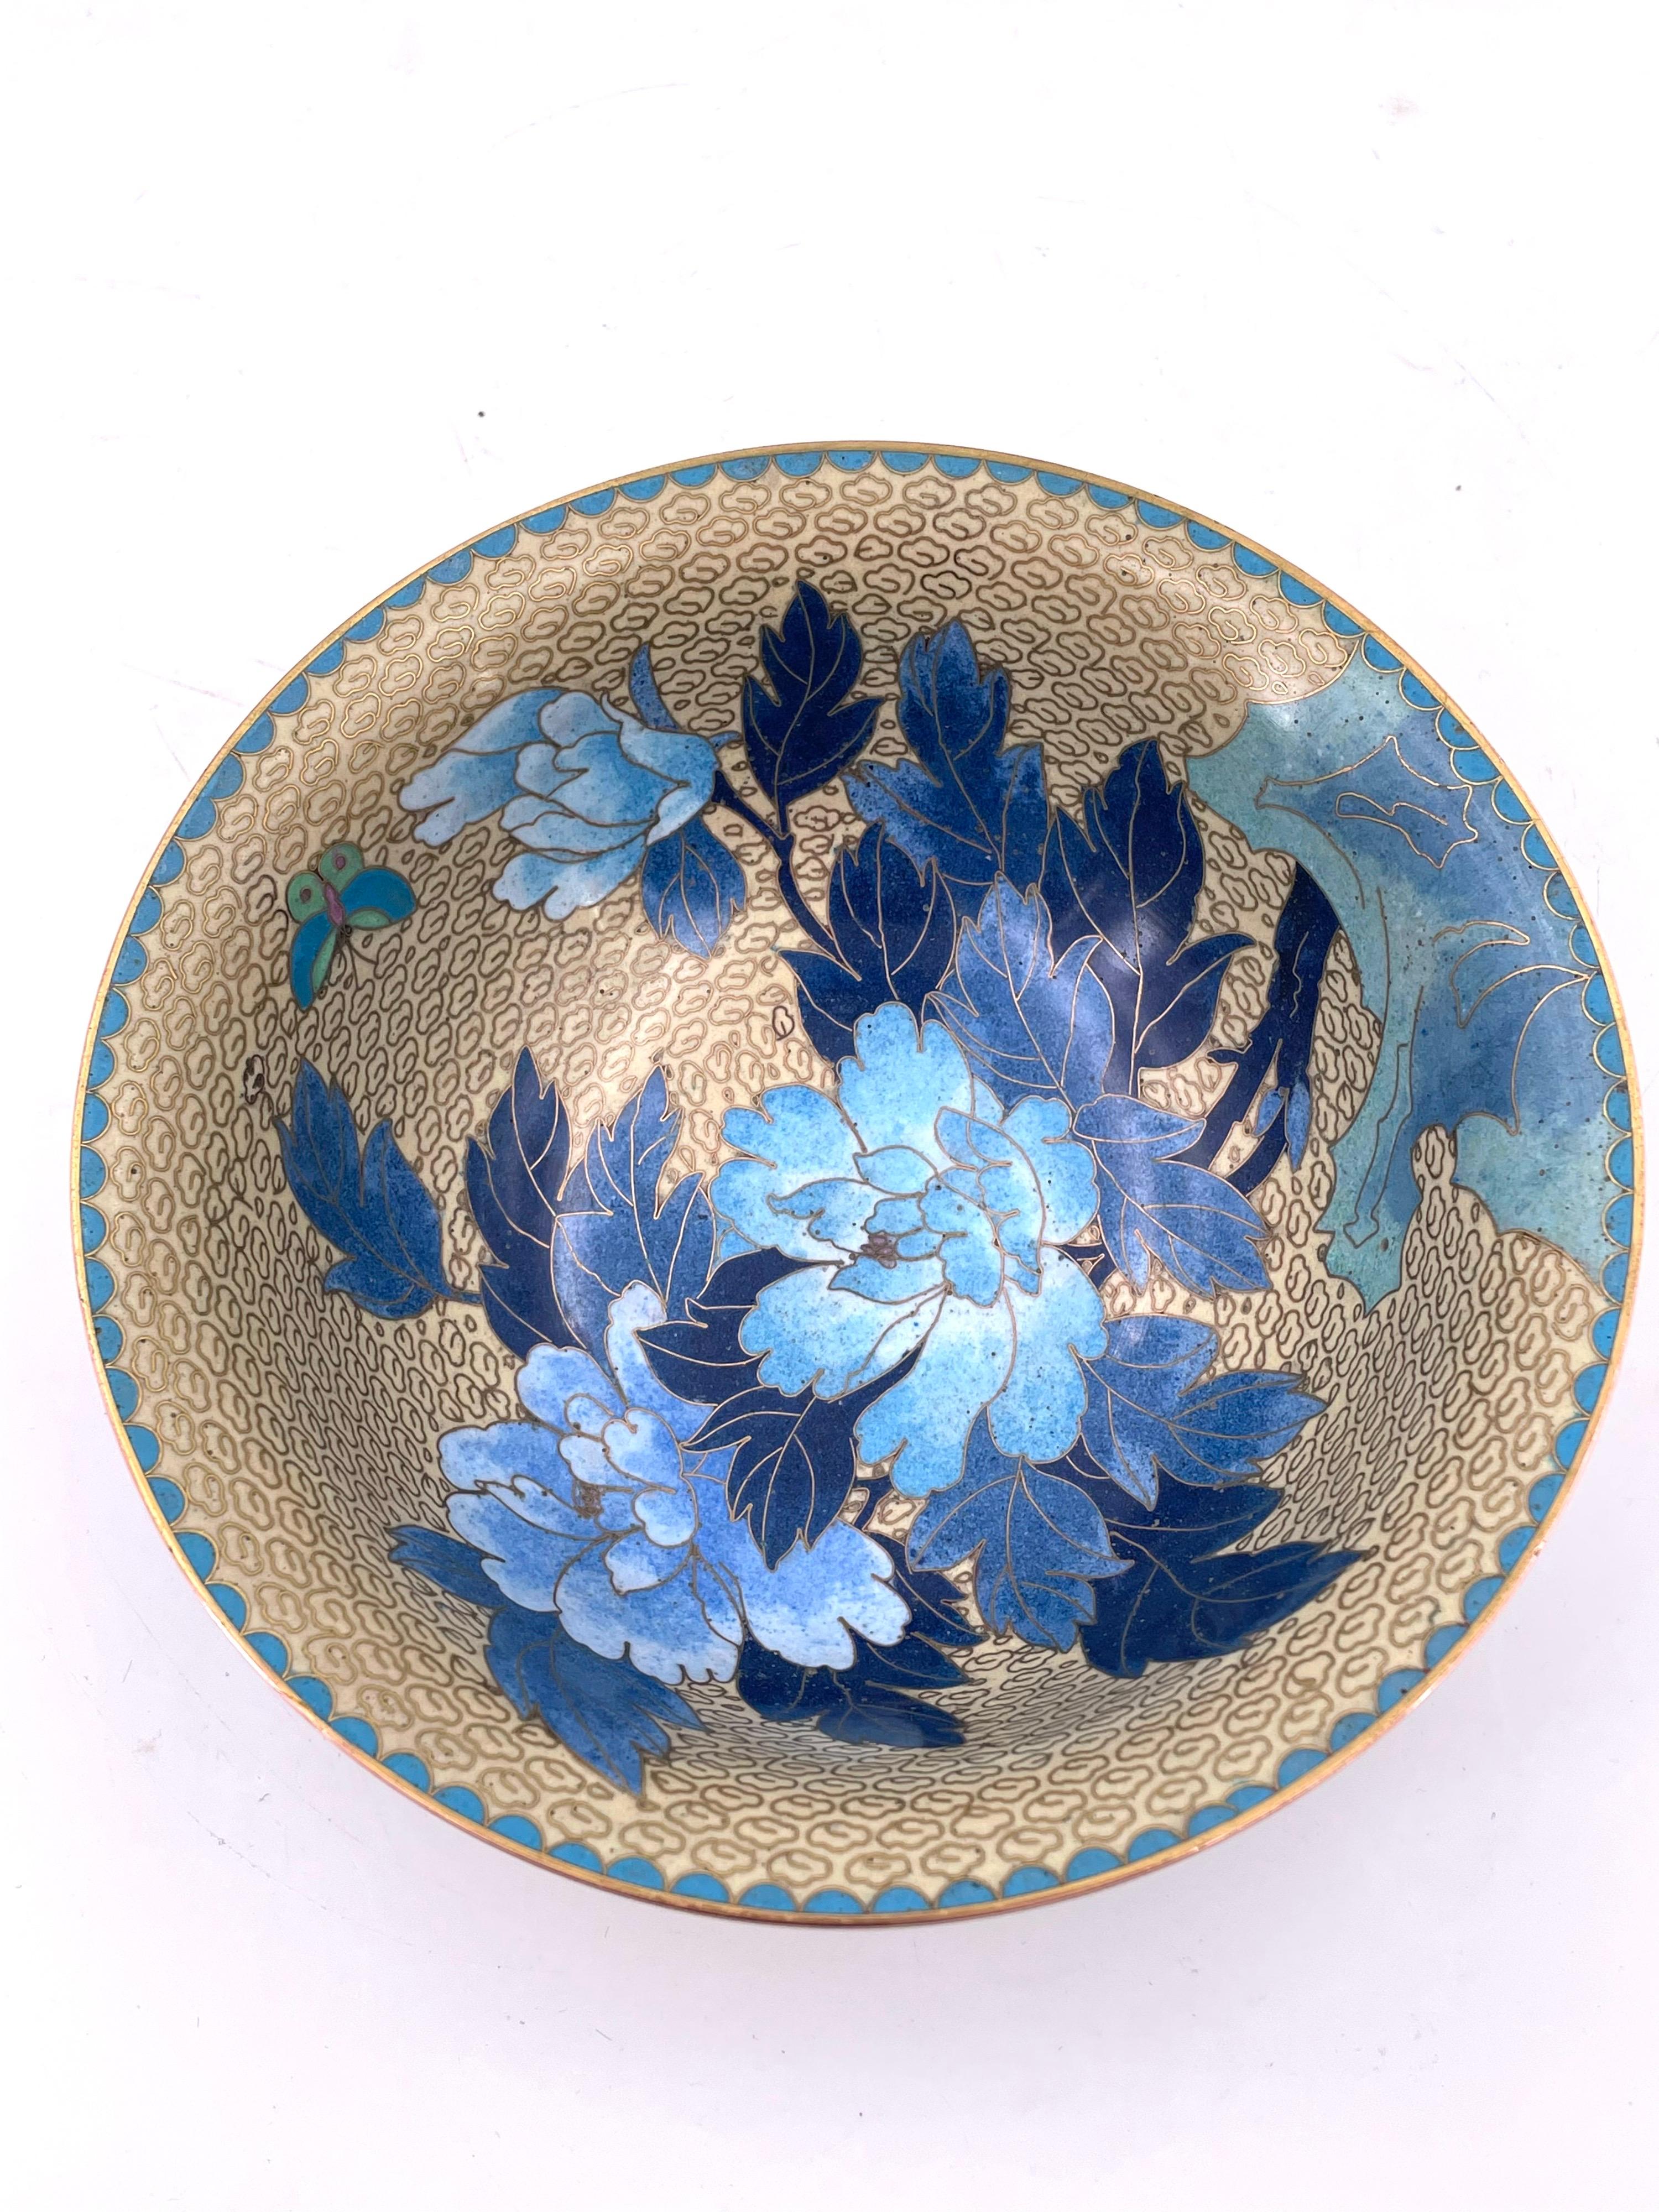 Chinoiserie Chinese Cloisonné Footed Bowl with Floral Butterfly Pattern